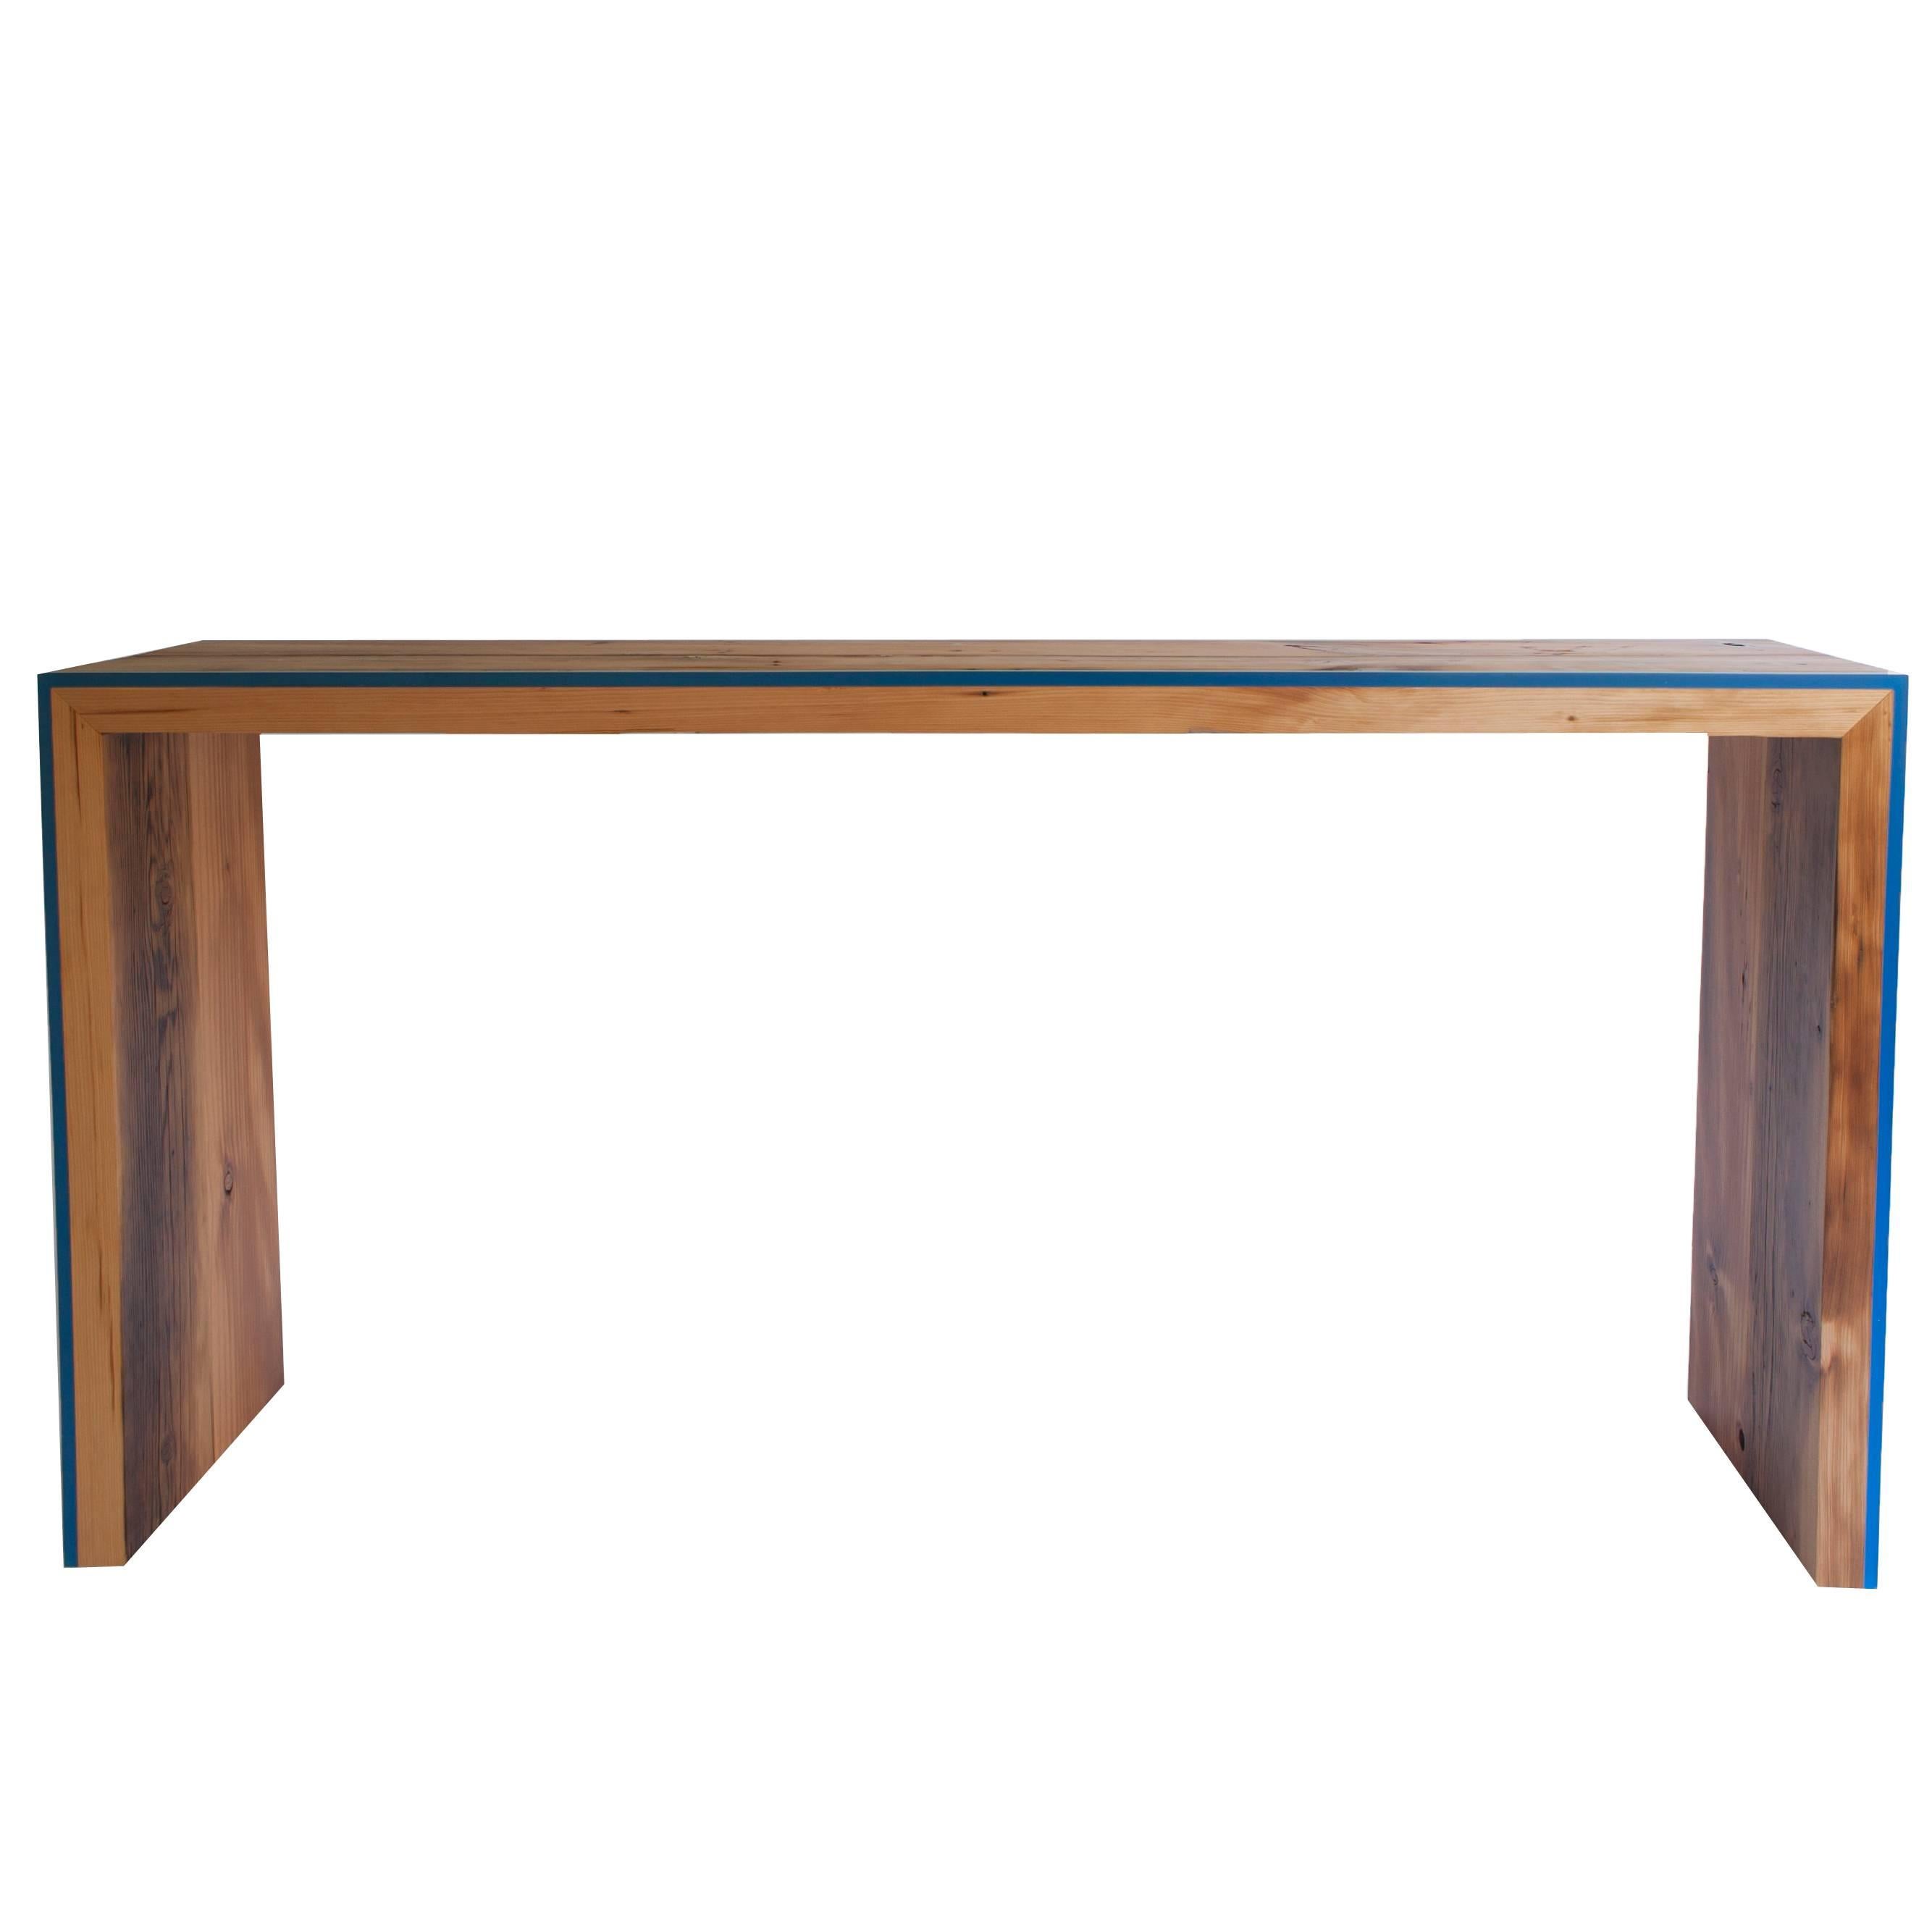 Custom Monster Island Console Table in Reclaimed Fir, Edged in Resin For Sale